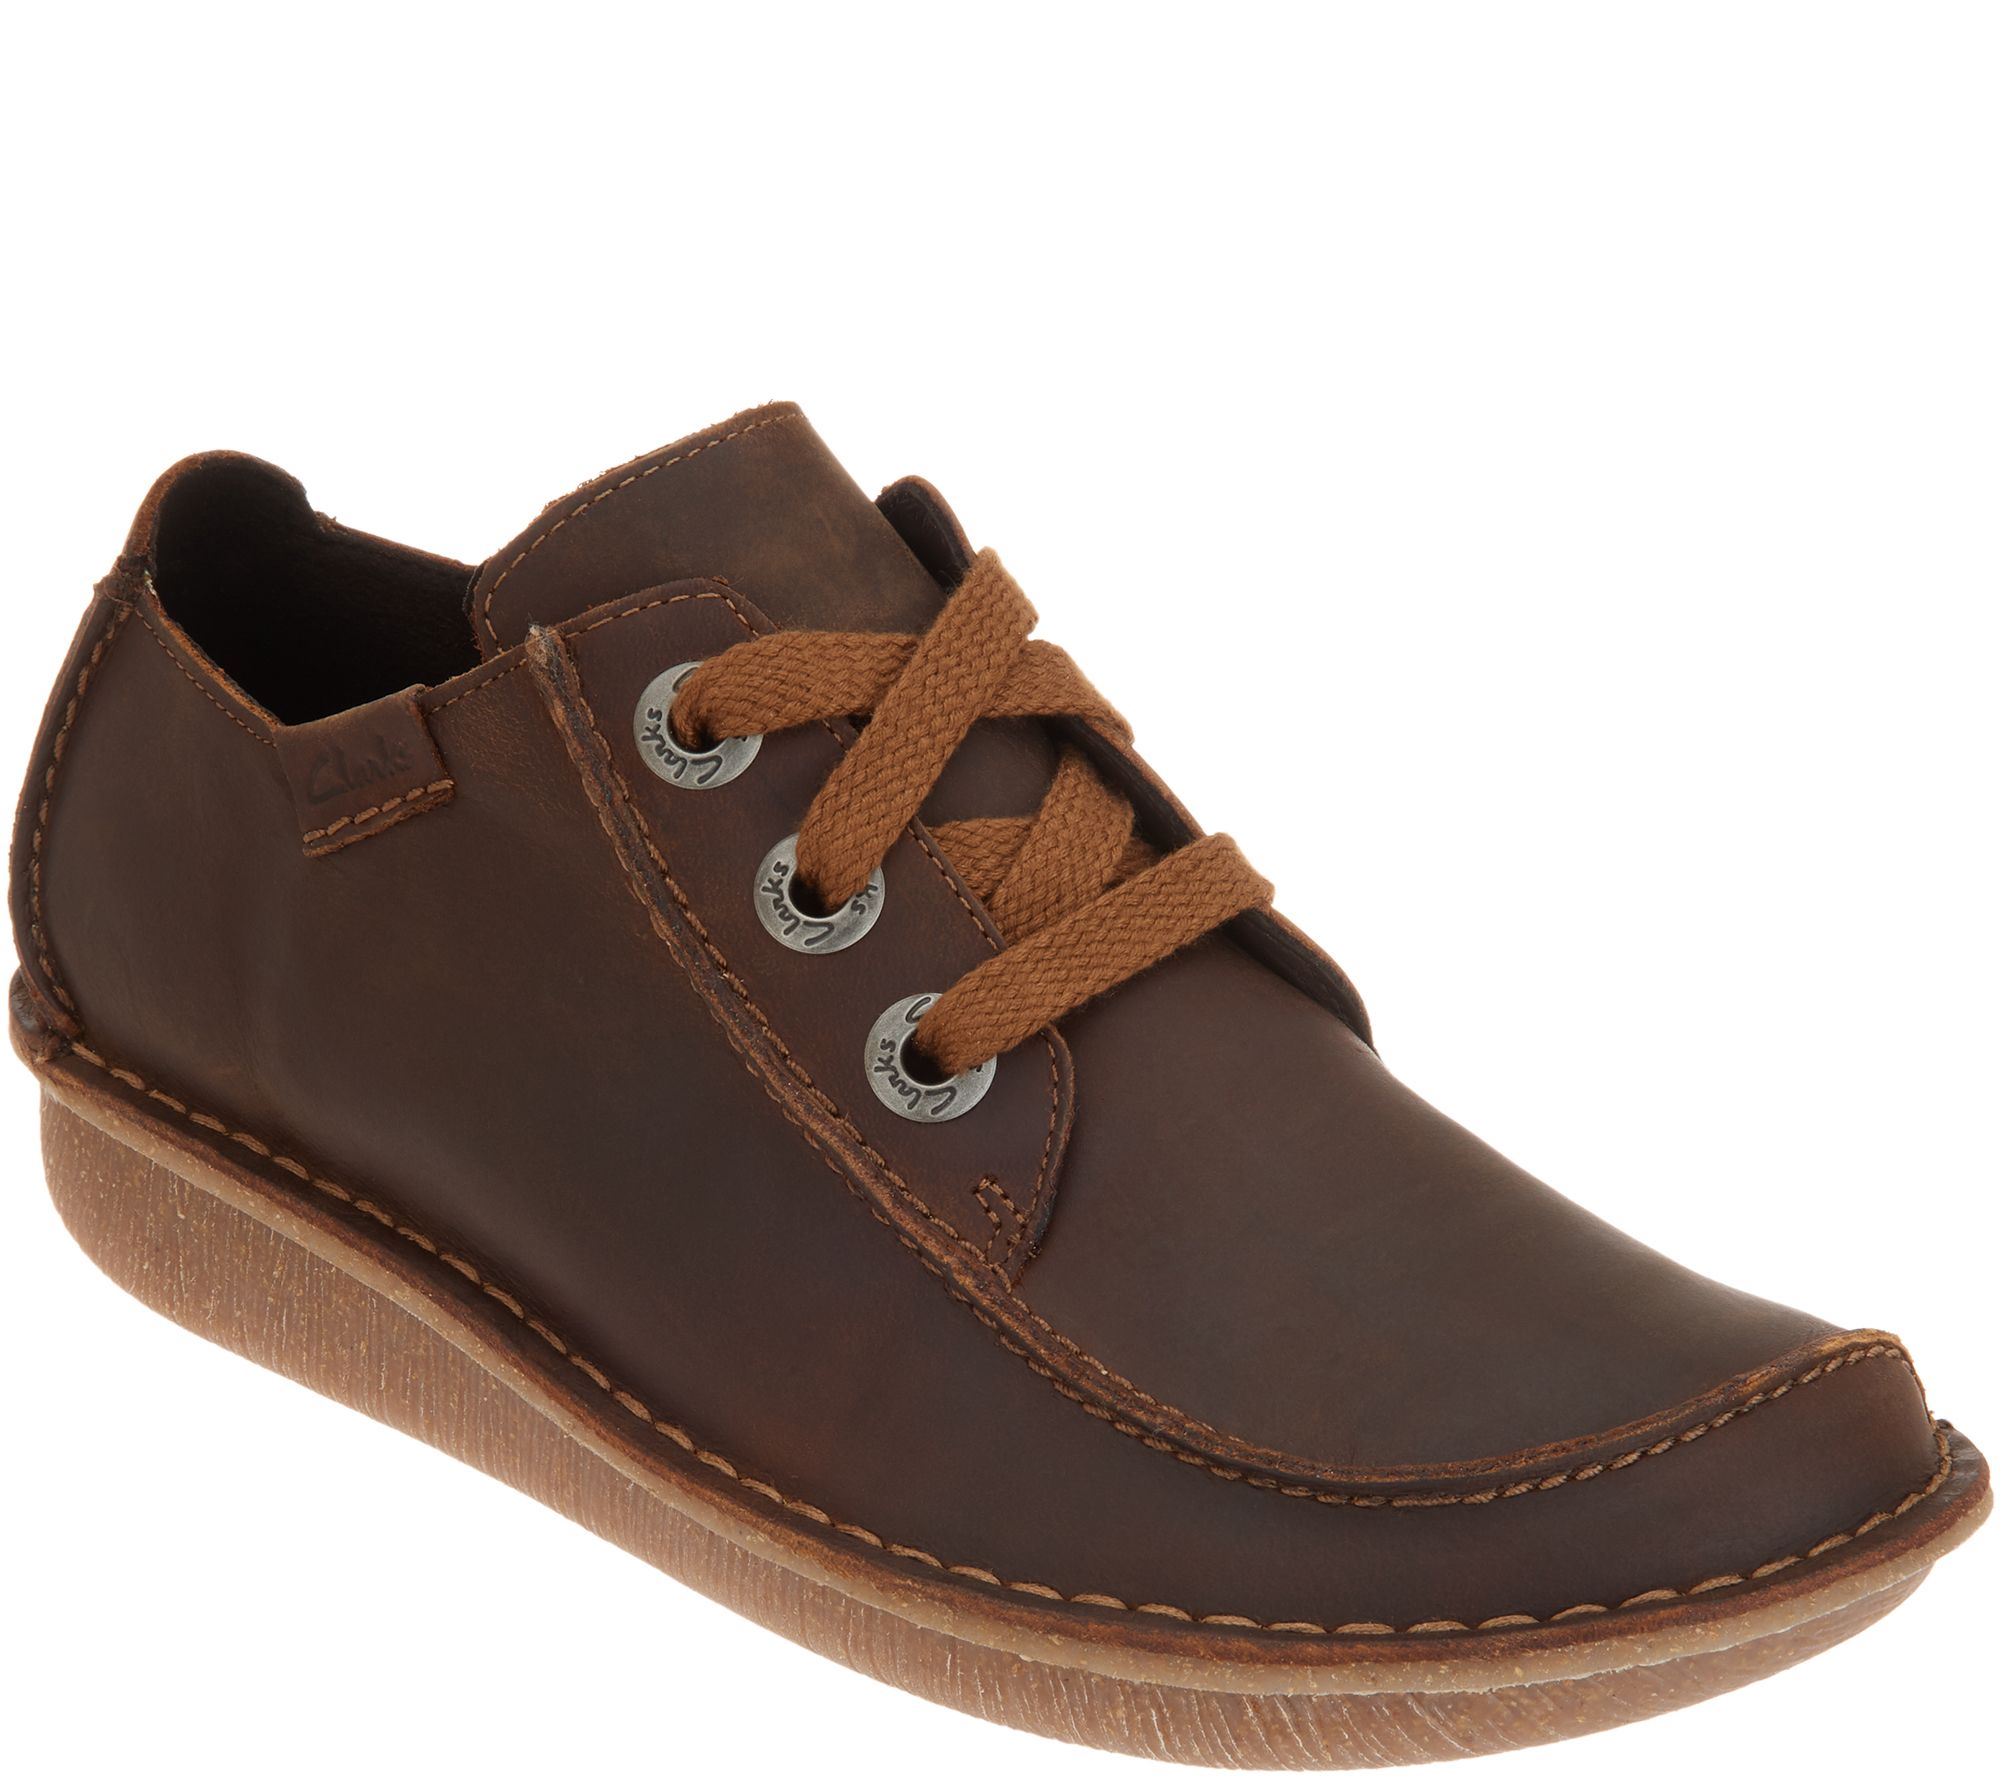 clarks unstructured shoes sale